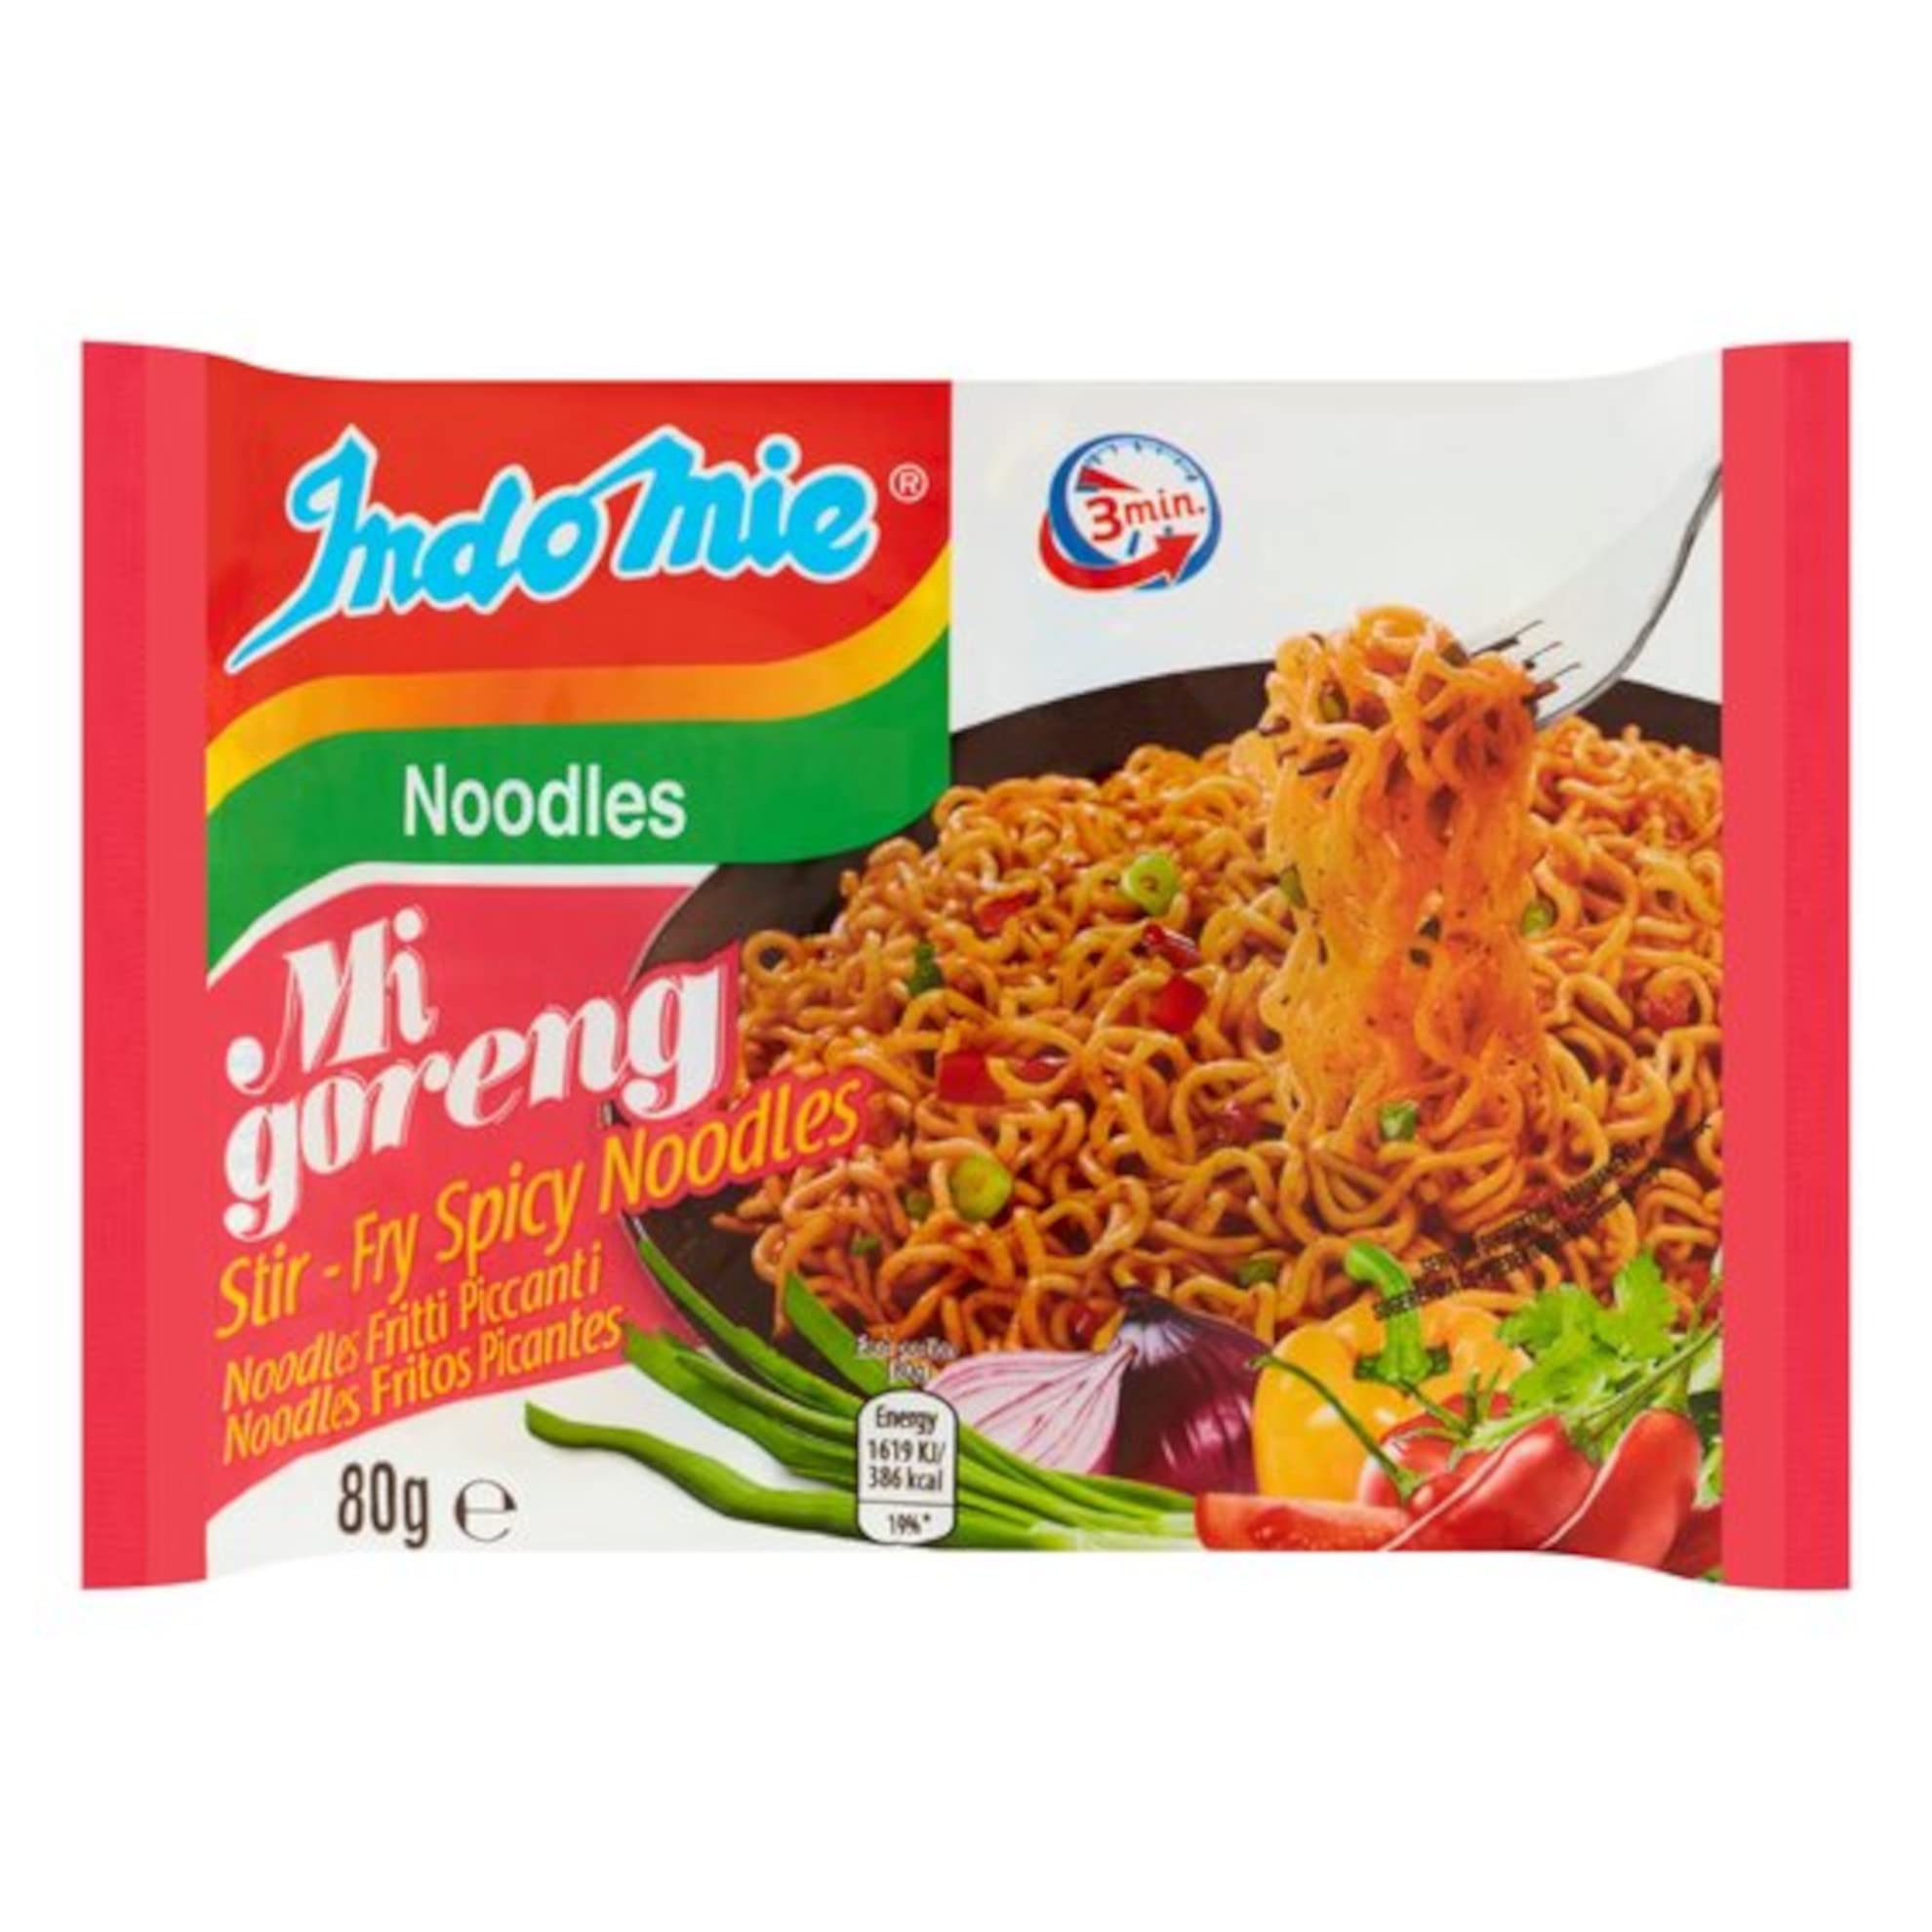 Indomie Mi Goreng Instant Stir Fry Noodles, Halal Certified, Hot & Spicy / Pedas Flavor 2.82 Ounce (Pack of 30)~$15.23 @ Amazon~Free Prime Shipping!